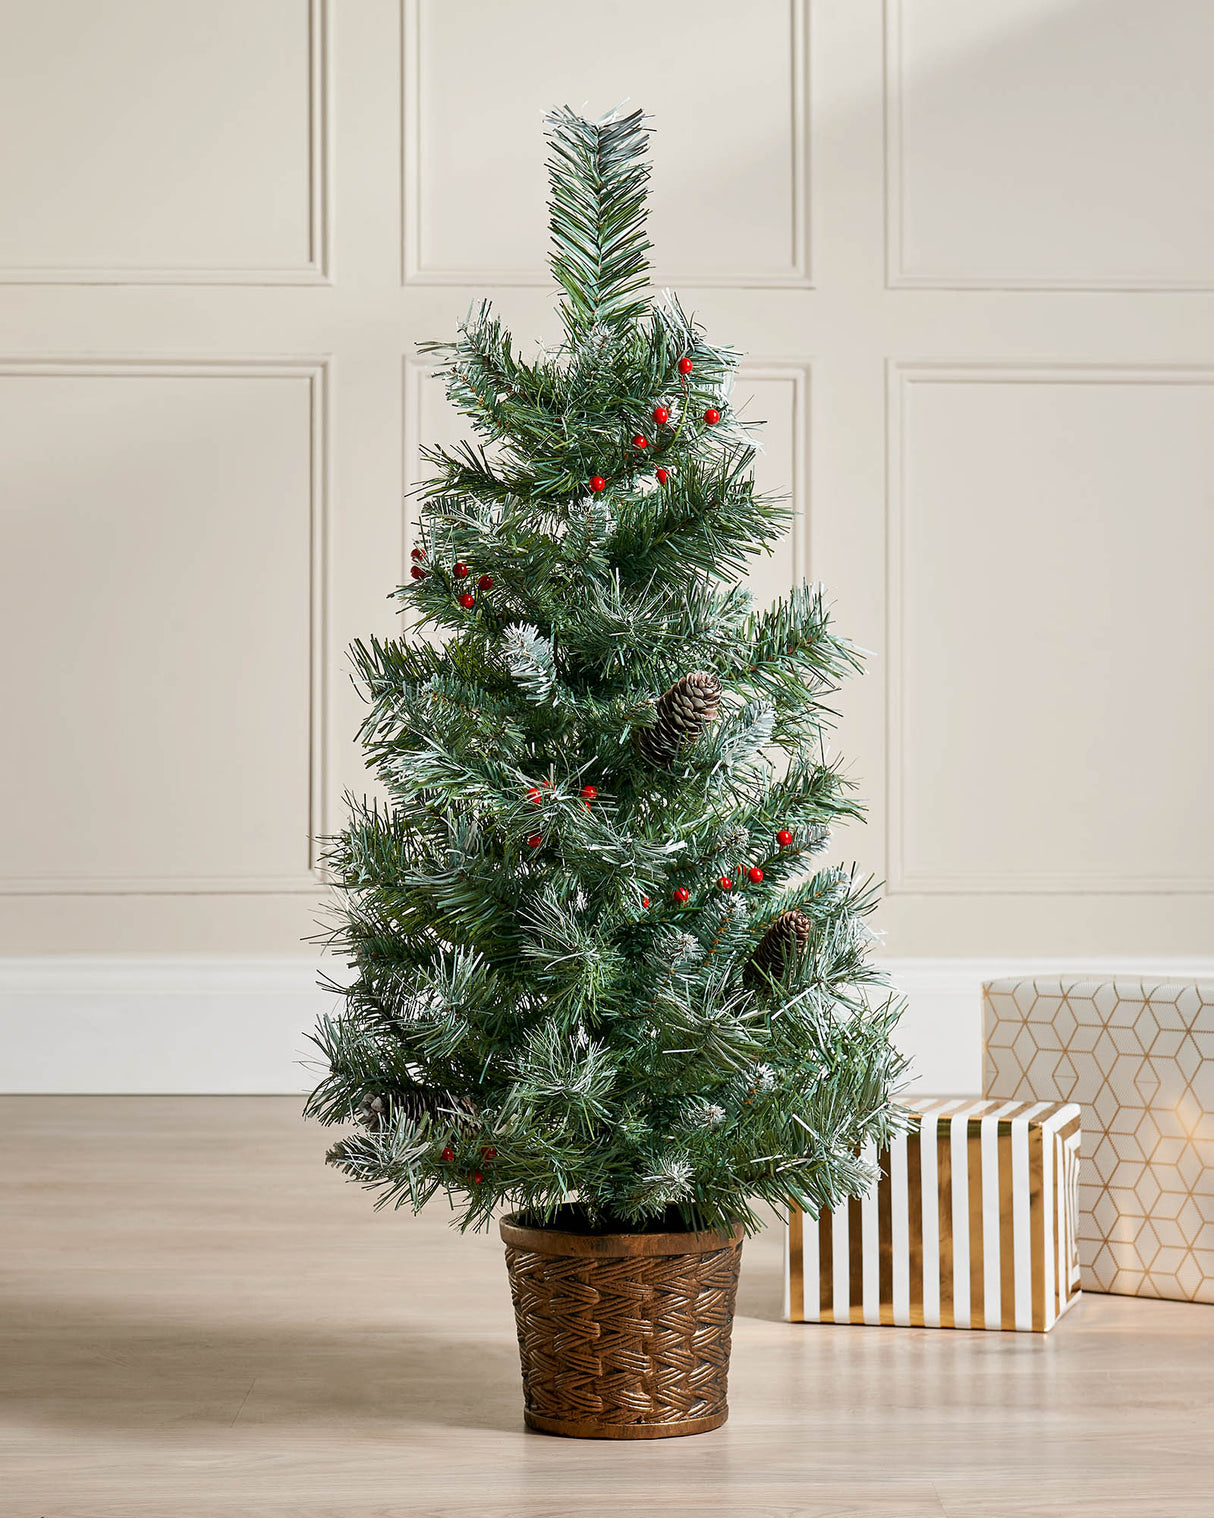 Potted Scandinavian Blue Spruce Christmas Tree, 3 ft